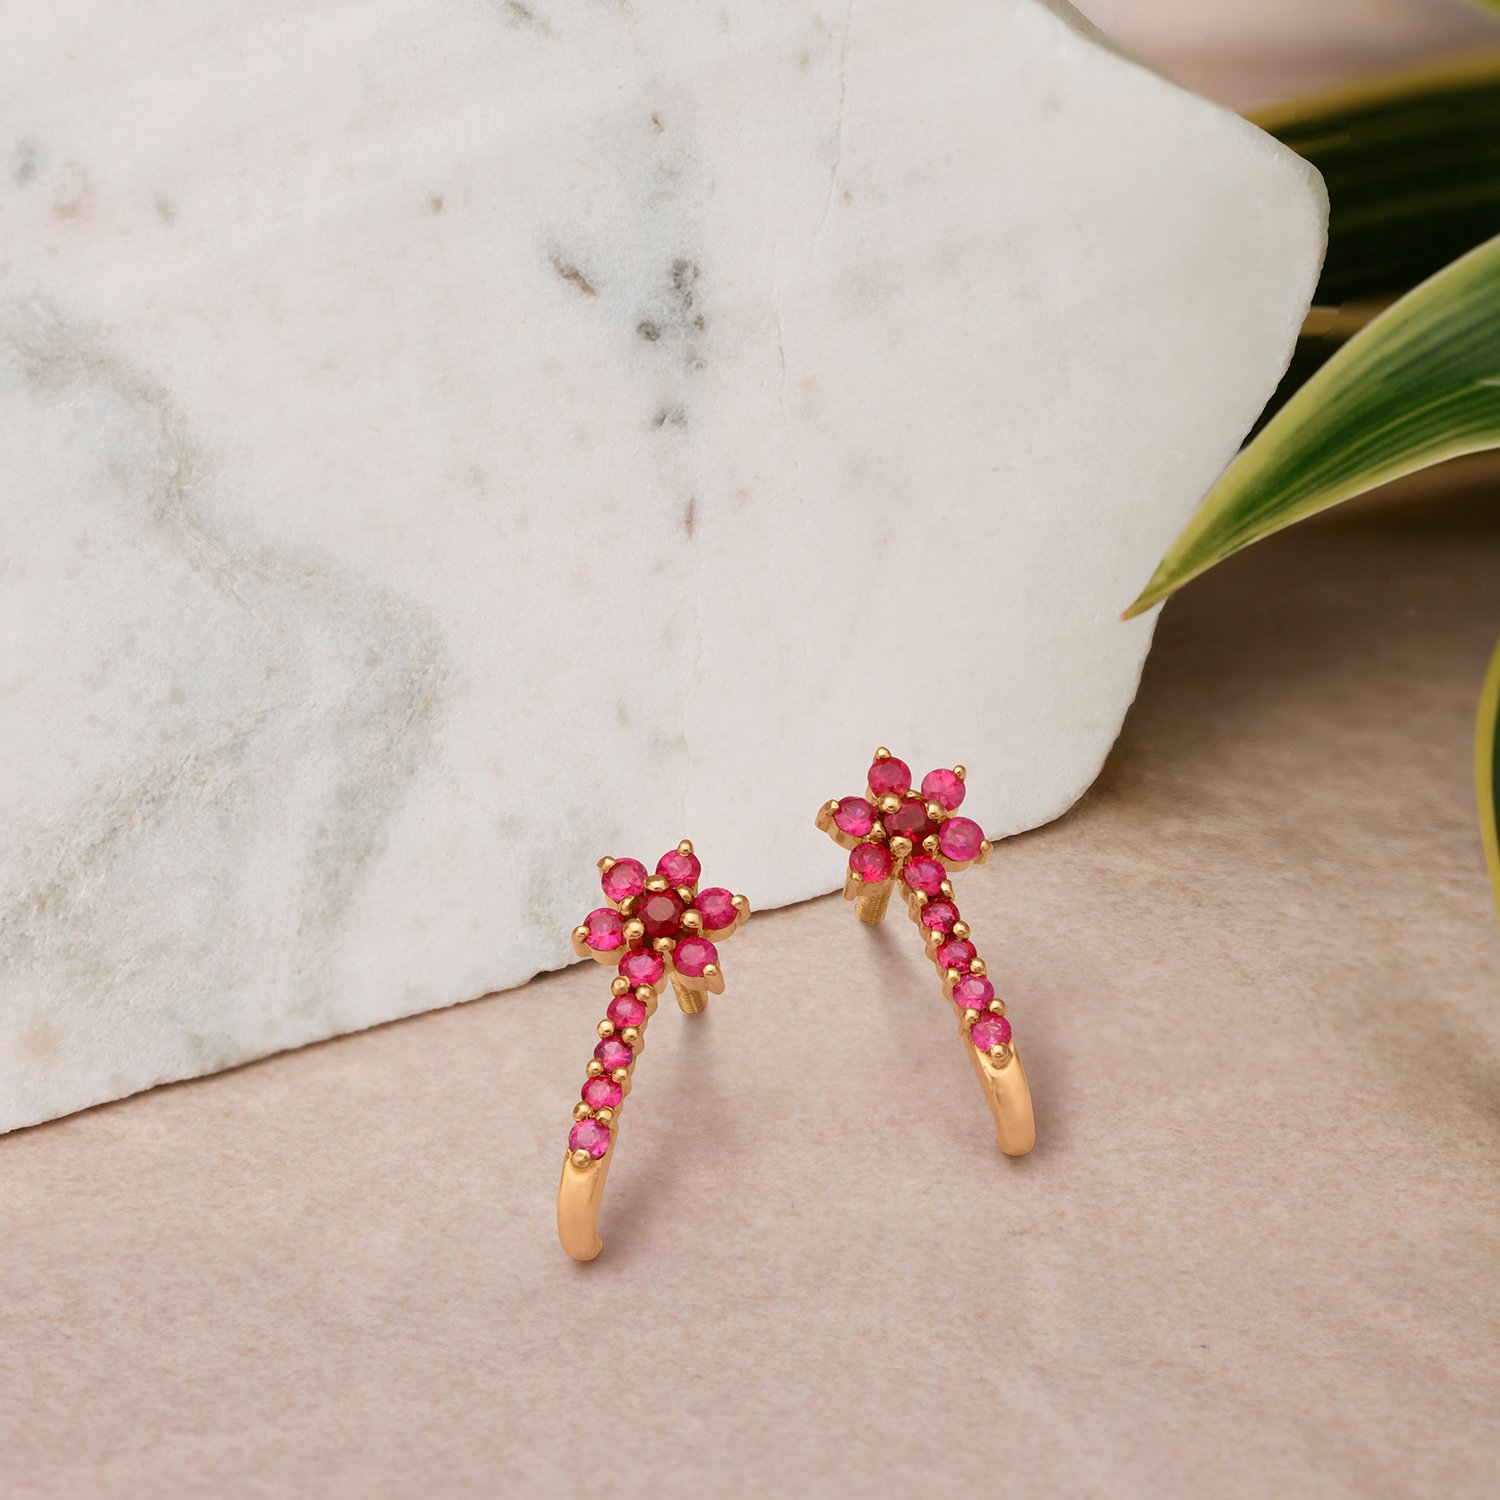 Twinkling Gold and Ruby Stud Earrings